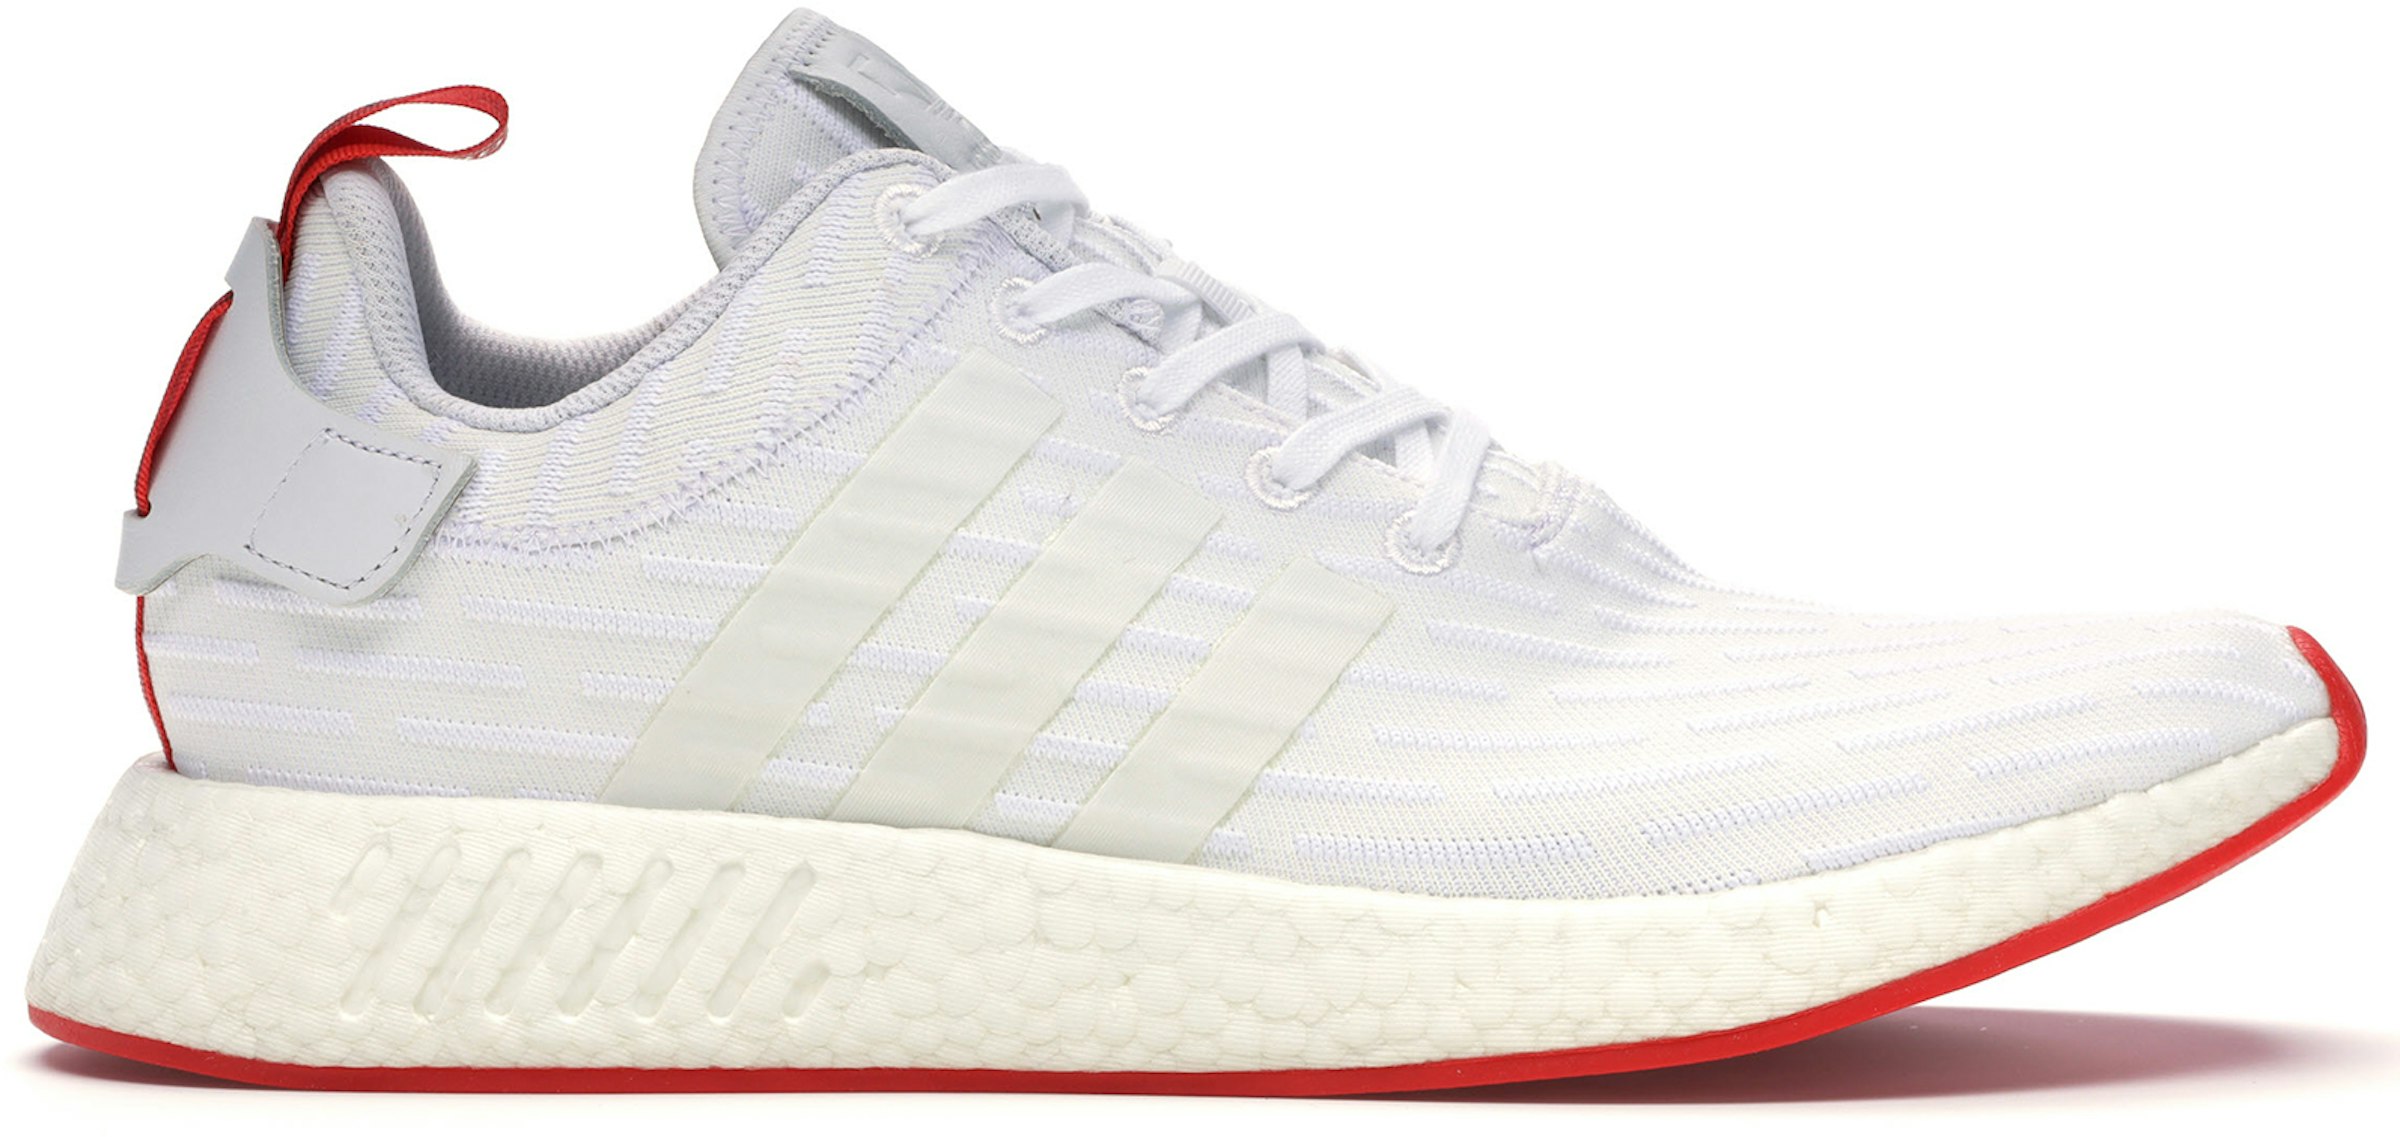 adidas NMD R2 White Red Two Toned BA7253 US